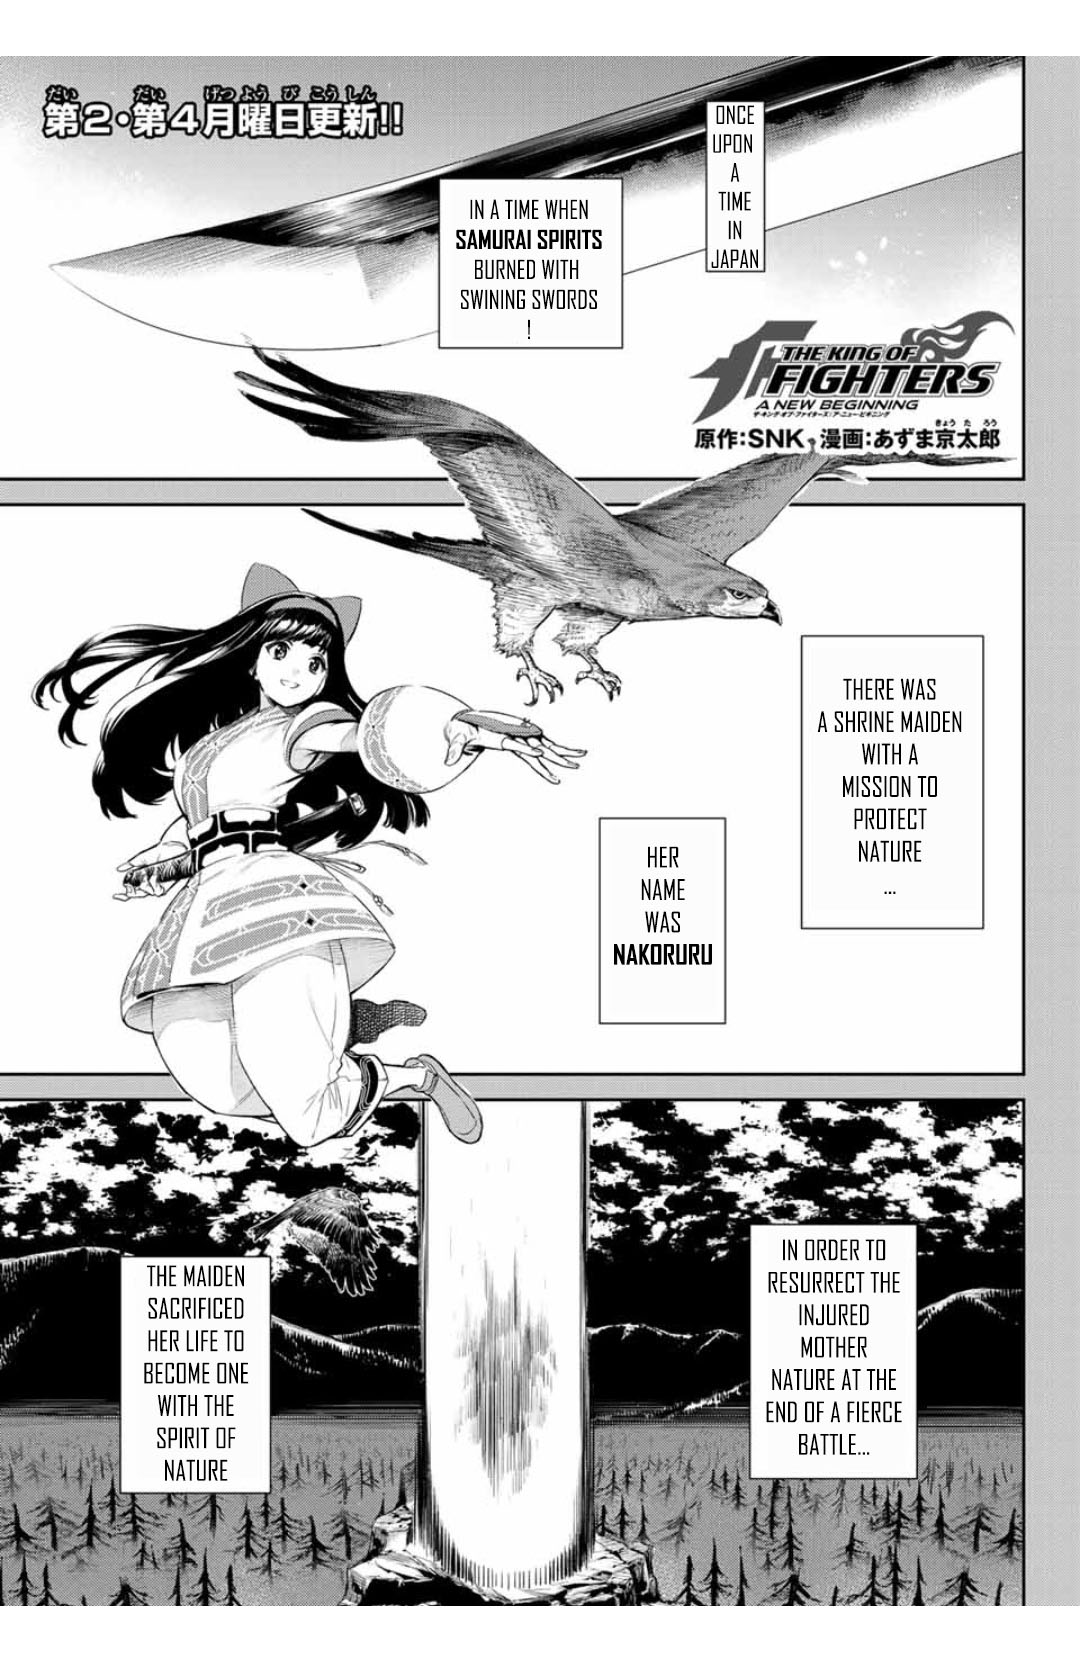 The King of Fighters: A New Beginning Vol. 2 Ch. 7.1 Team Japan vs Team Yagami 5th